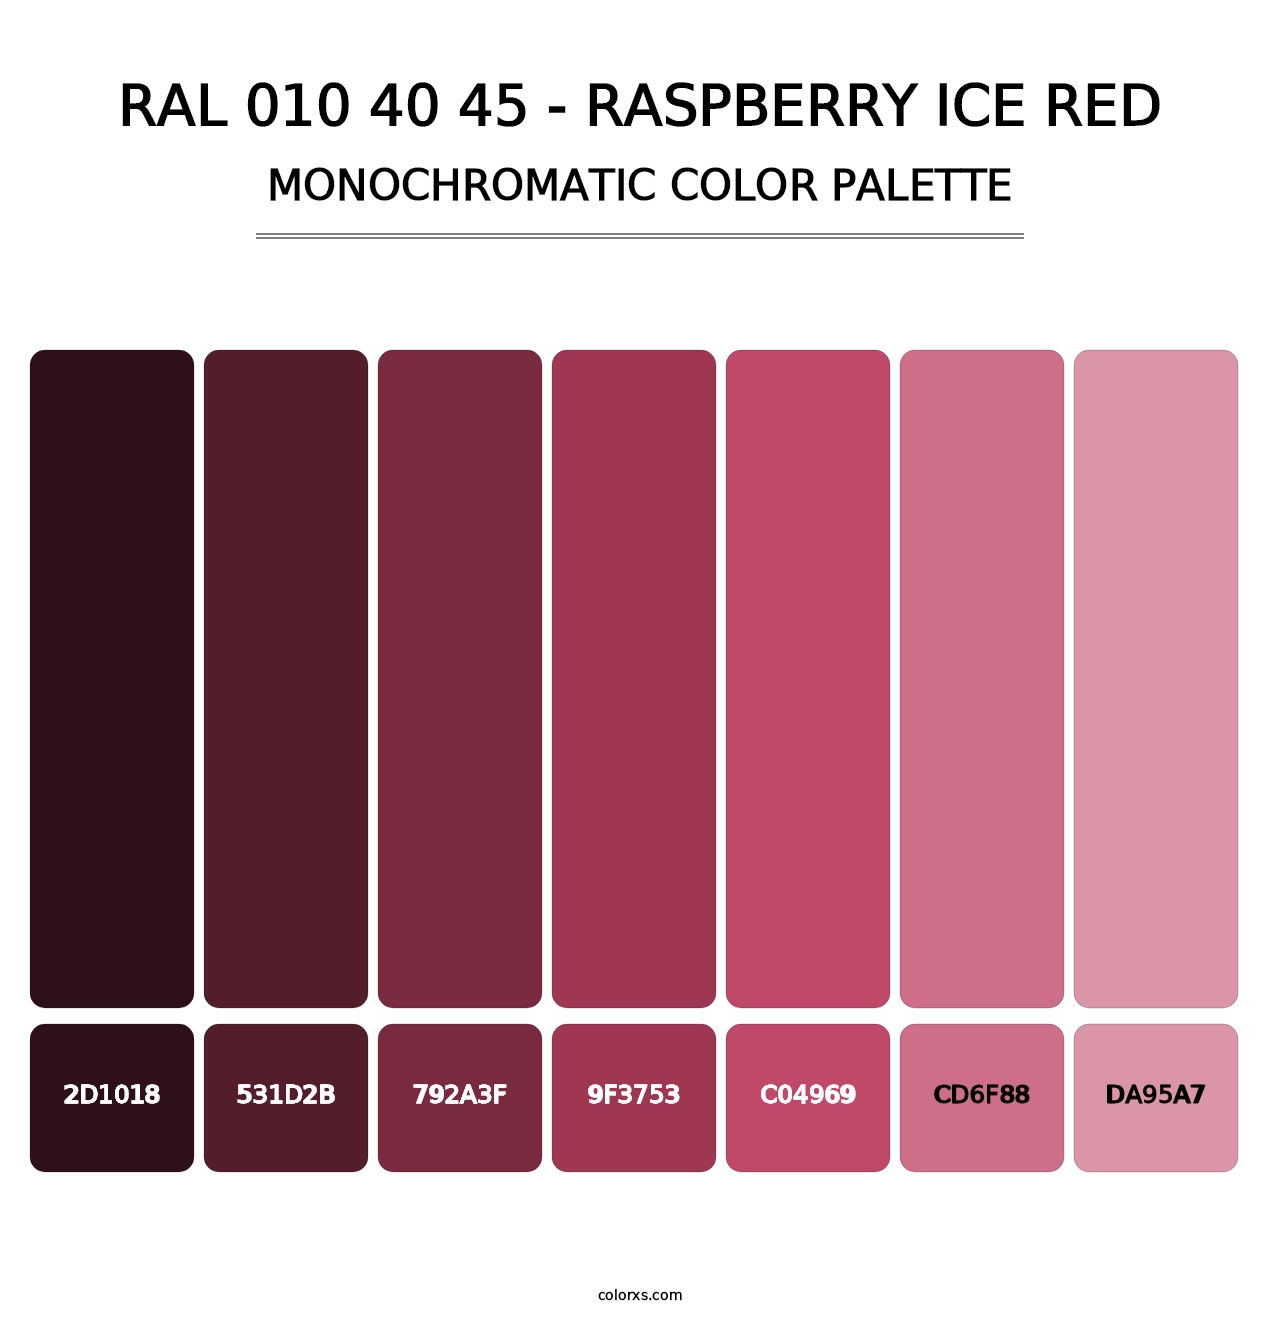 RAL 010 40 45 - Raspberry Ice Red - Monochromatic Color Palette